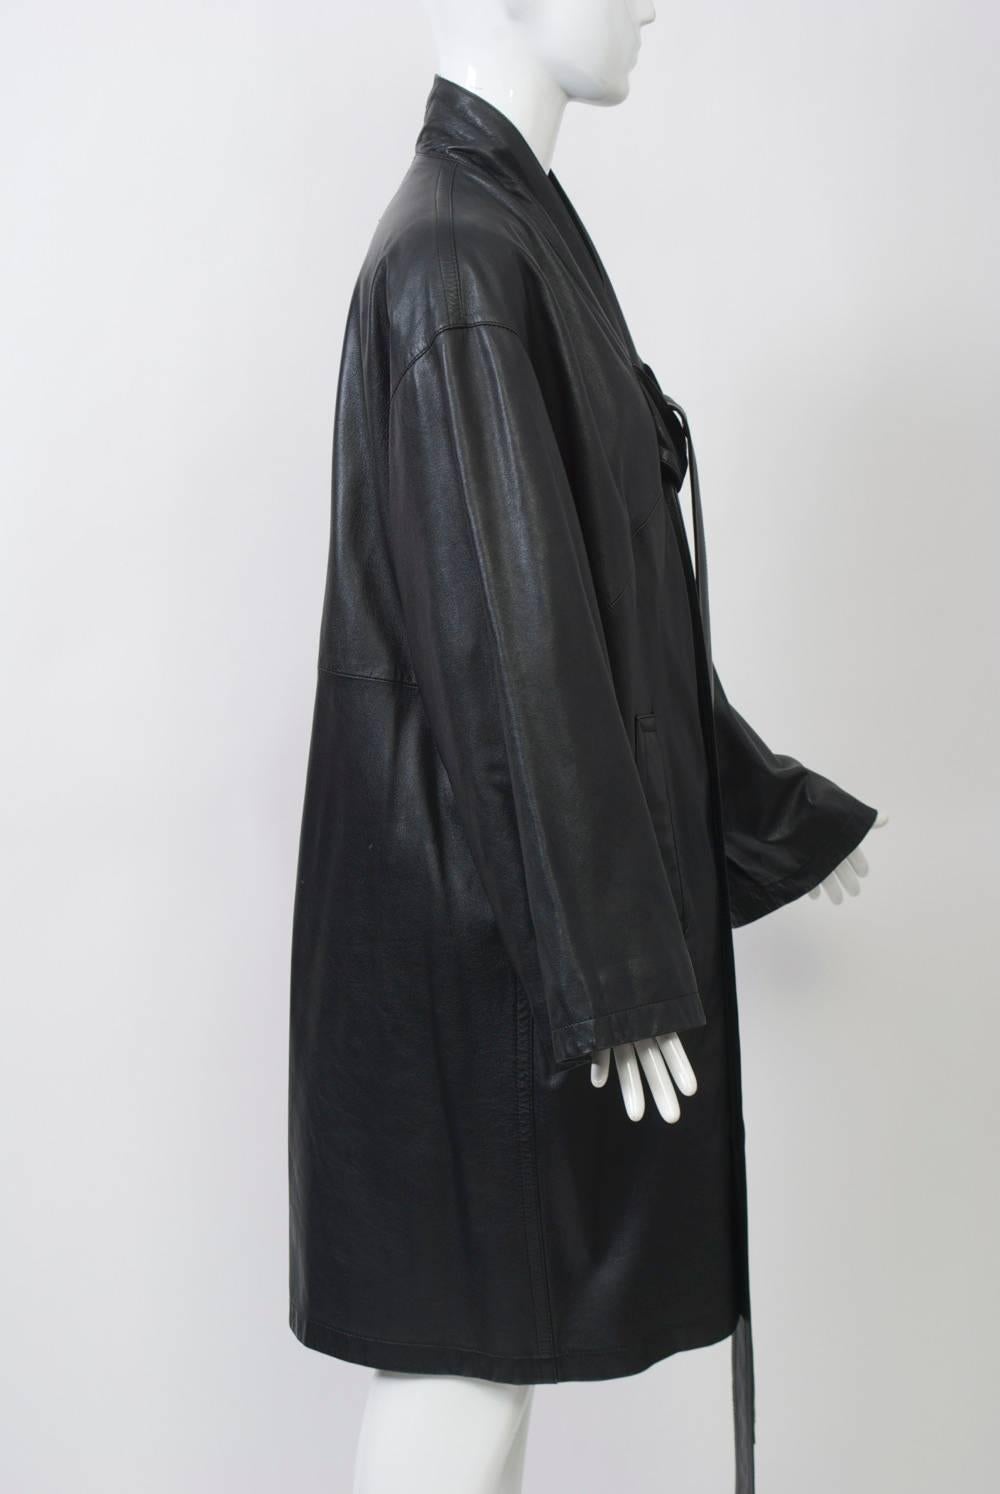 Kimono-style black leather coat by Jean Paul Gaulthier with dropped shoulders and wide sleeves. The collar band leads to two long ties to knot in front. Side pockets. Length is just above knees. 